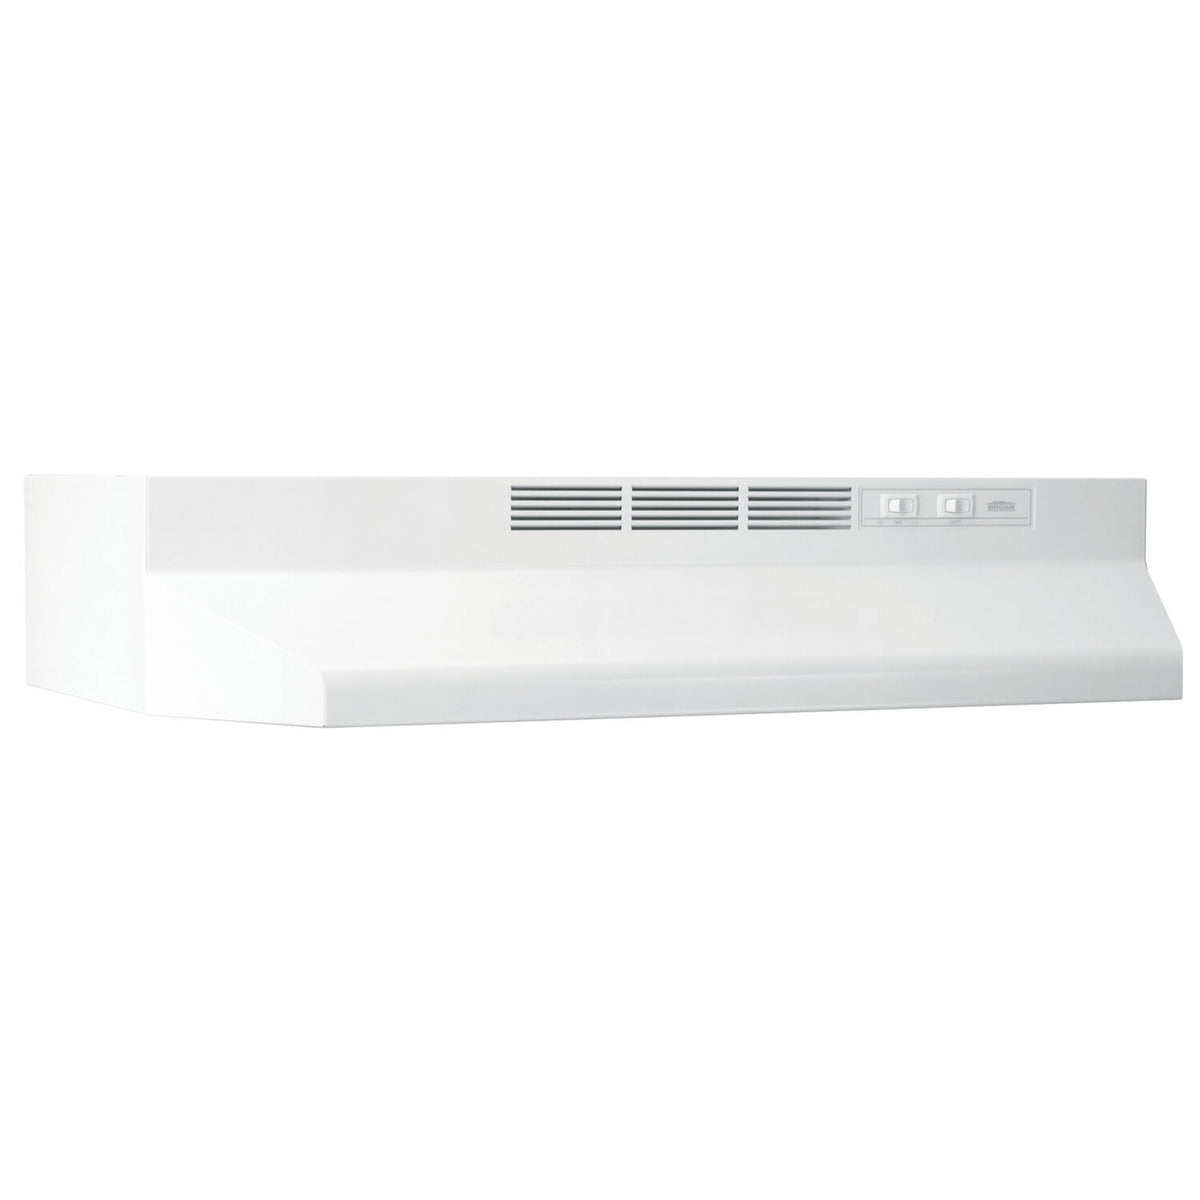 Broan-Nutone 41000 Series 30 In. Non-Ducted White Range Hood - Power  Townsend Company